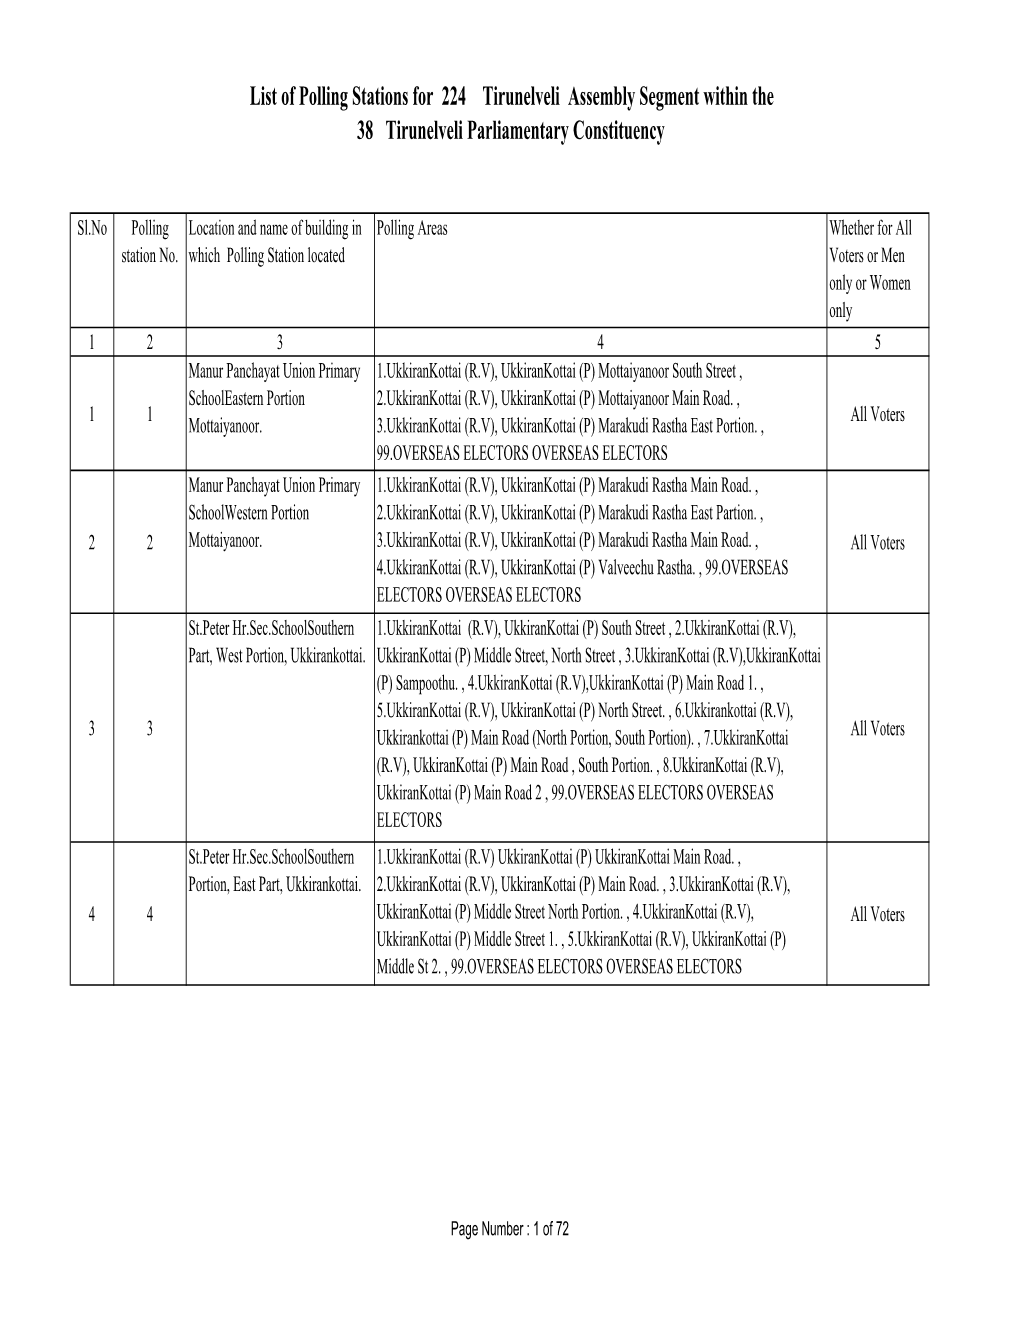 List of Polling Stations for 224 Tirunelveli Assembly Segment Within the 38 Tirunelveli Parliamentary Constituency